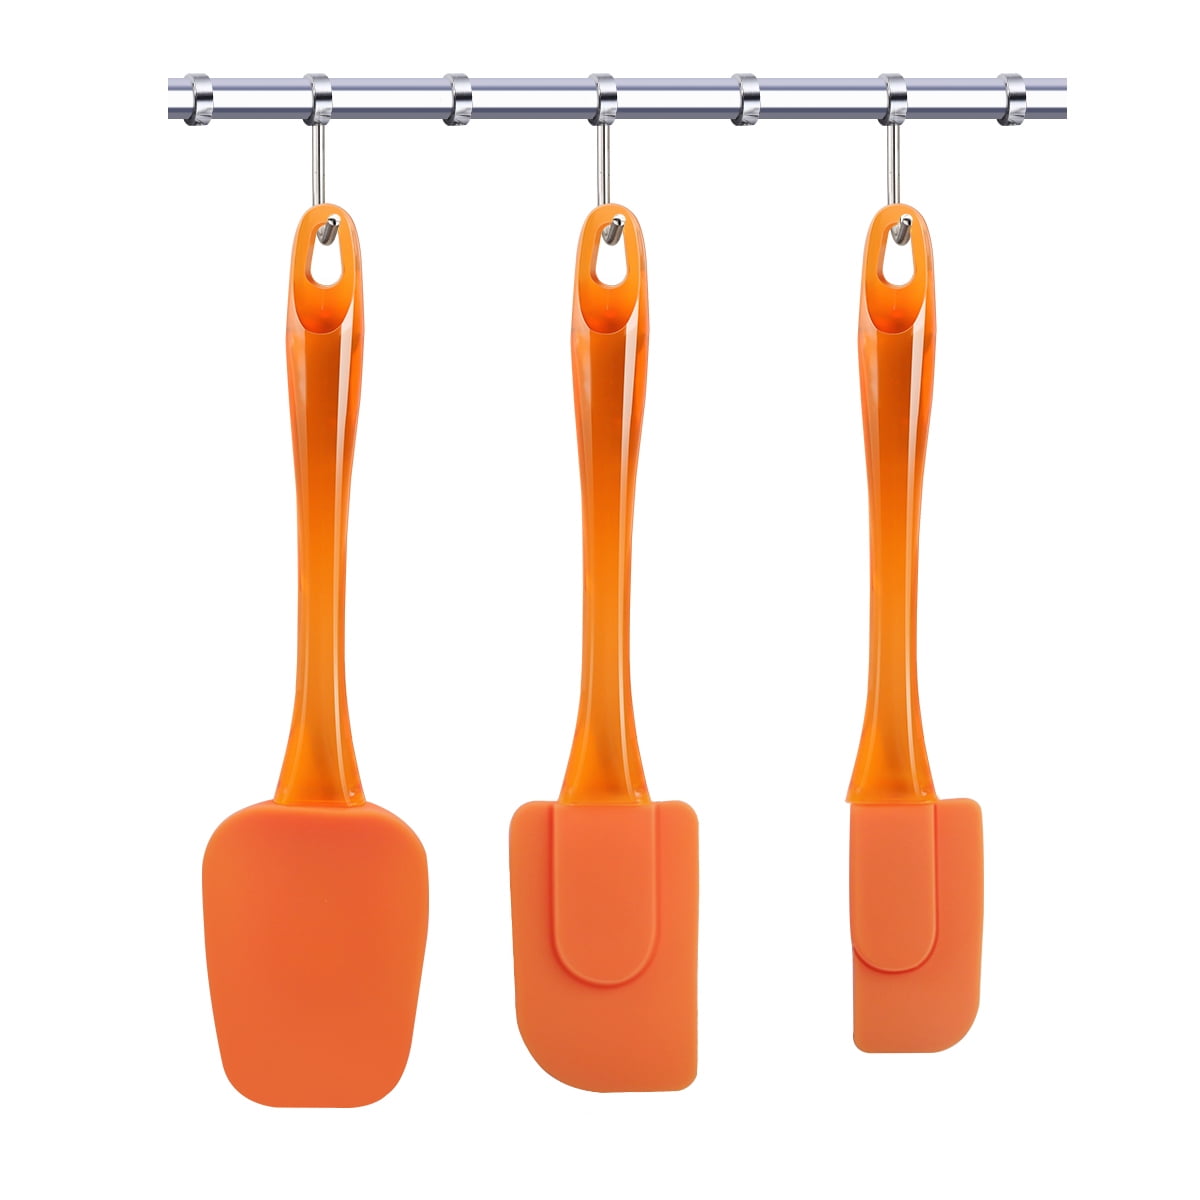 OVENTE Orange Non-Stick Silicone Spatula Set with Heat Resistant &  Stainless Steel Core, Set of 5 SP12305O - The Home Depot